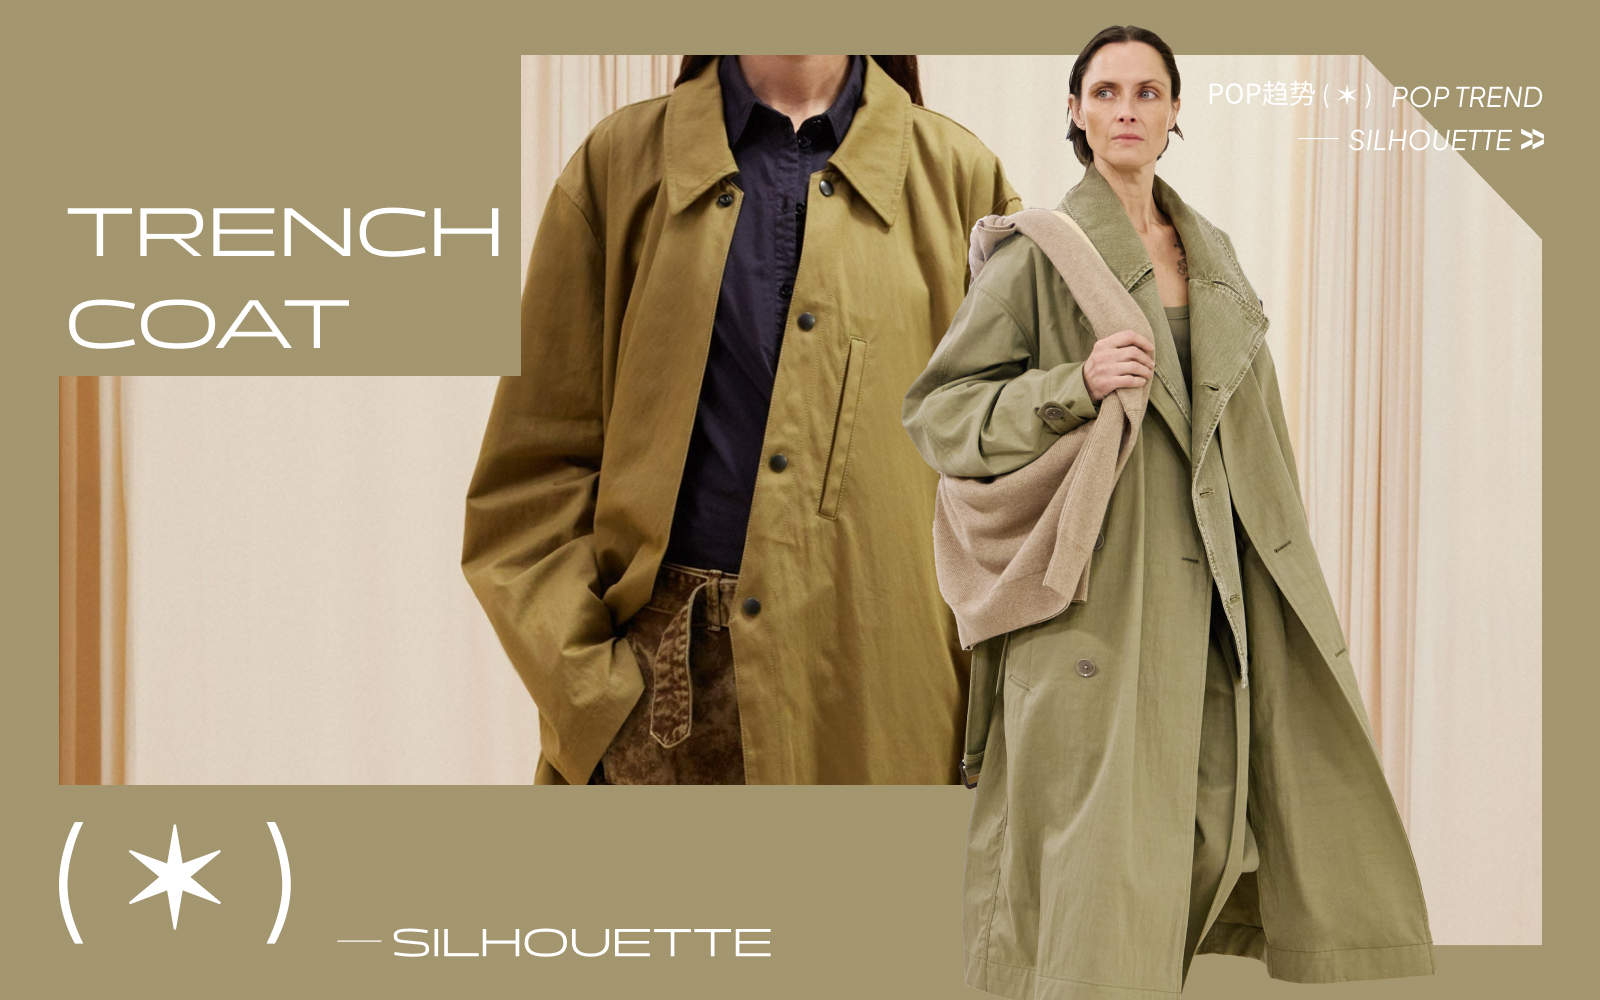 The Silhouette Trend for Women's Trench Coat